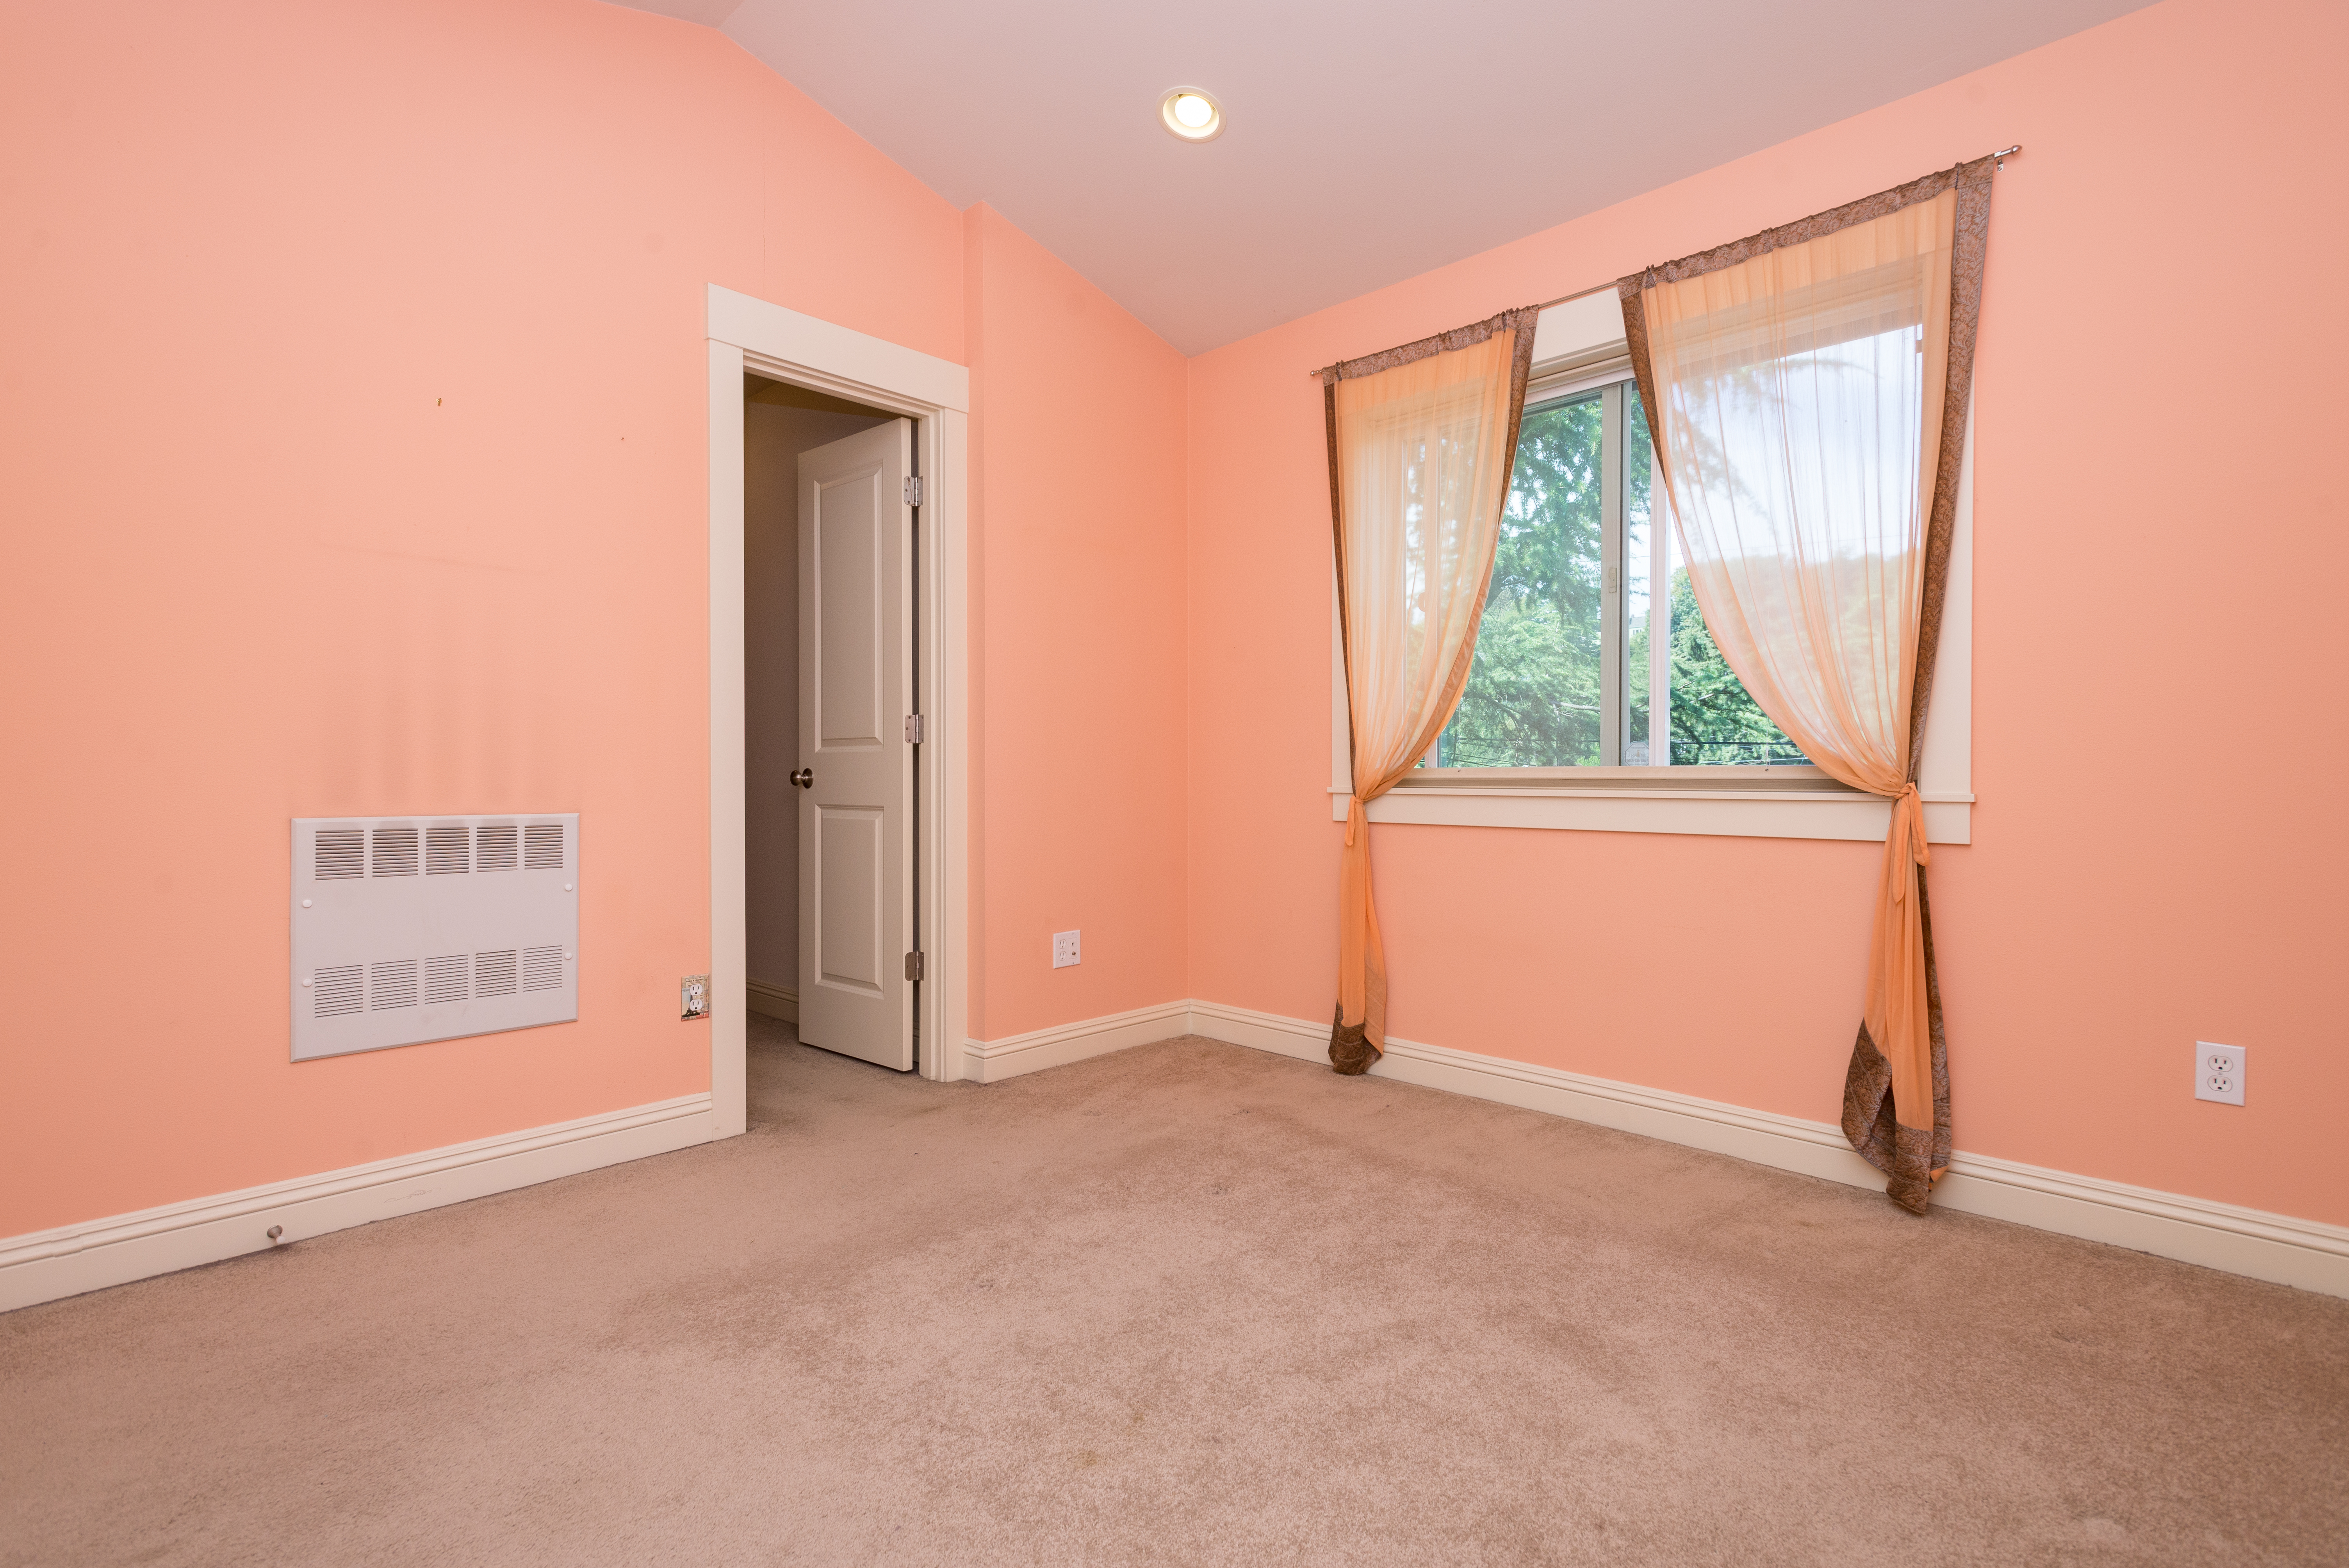 Property Photo: Master bedroom 1770 19th Ave S D  WA 98144 